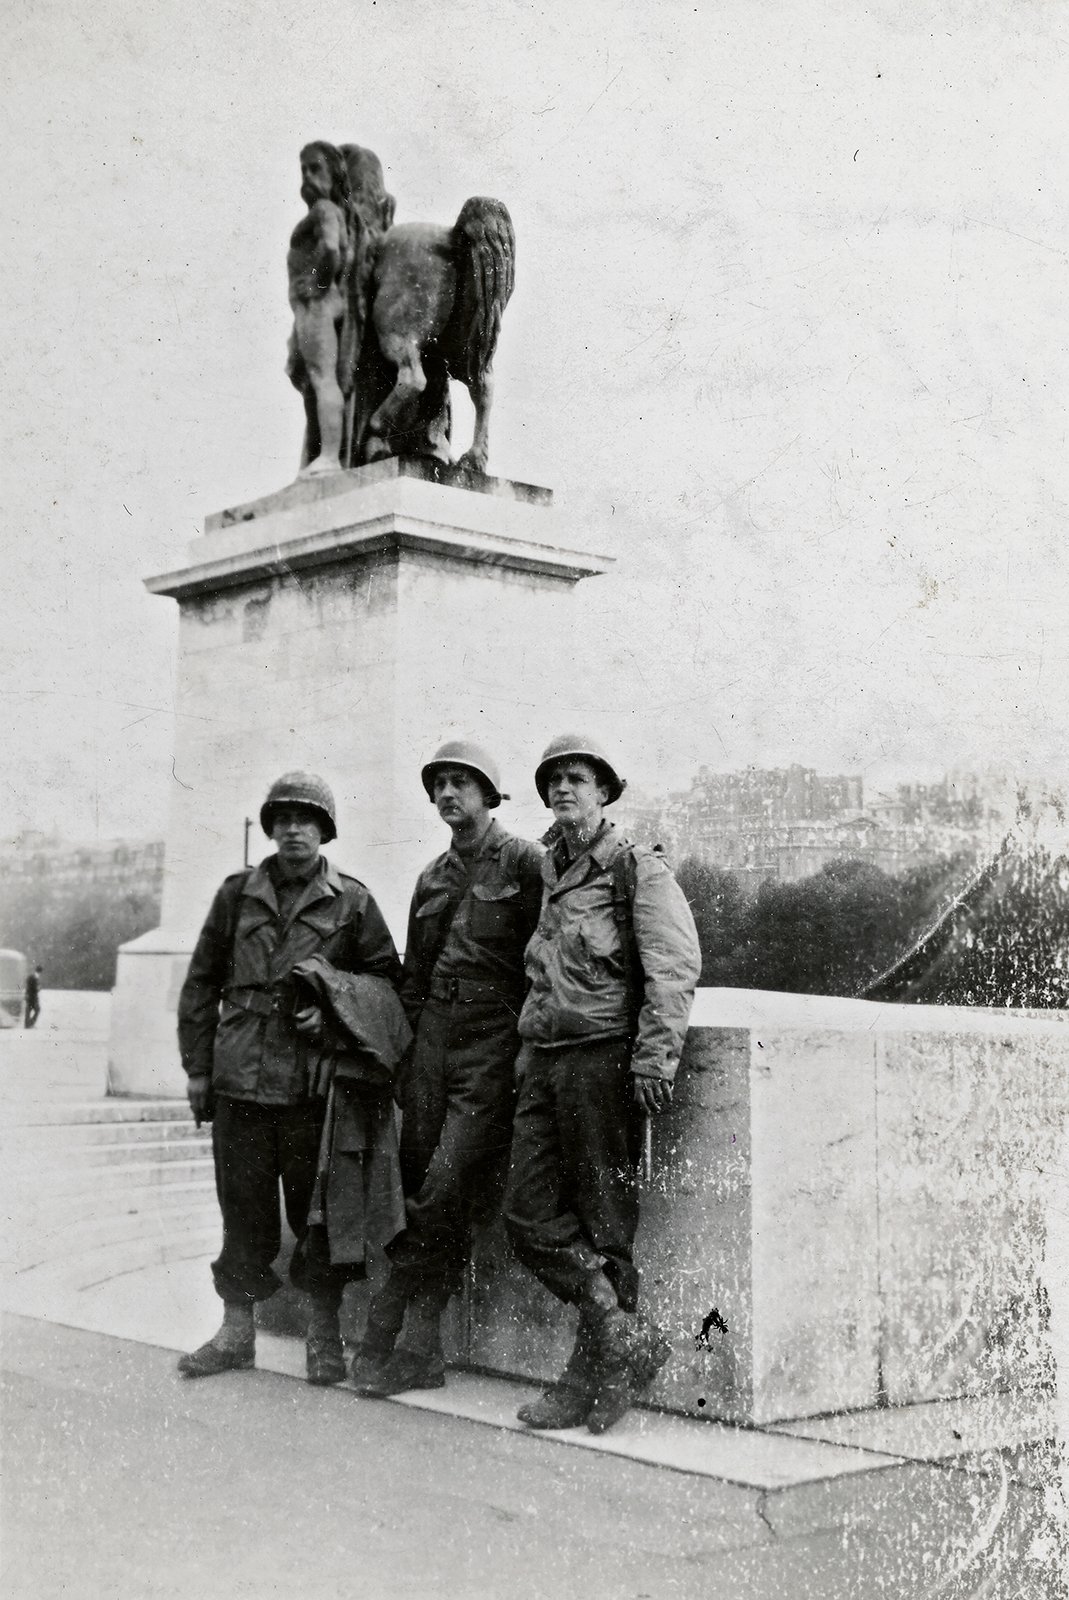 William McDermott, Alice's father, Paris, August 29, 1944, across from the Eiffel Tower on the banks of the River Seine, with Rosen and Campbell (annotated on back)